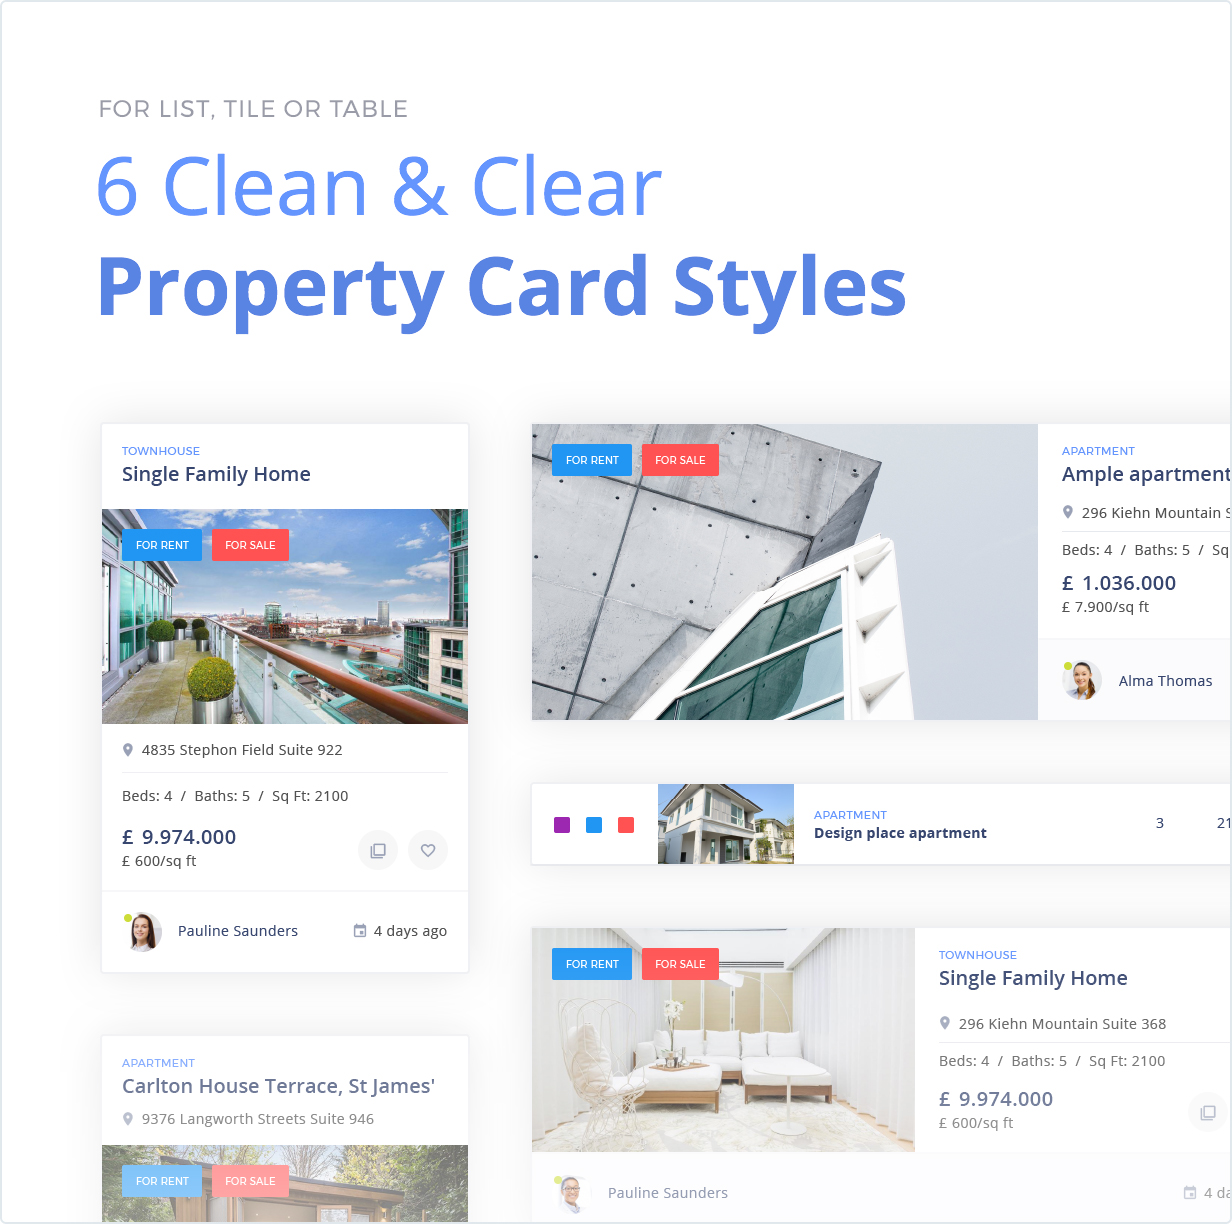 6 Clean and Clear Property Card Styles